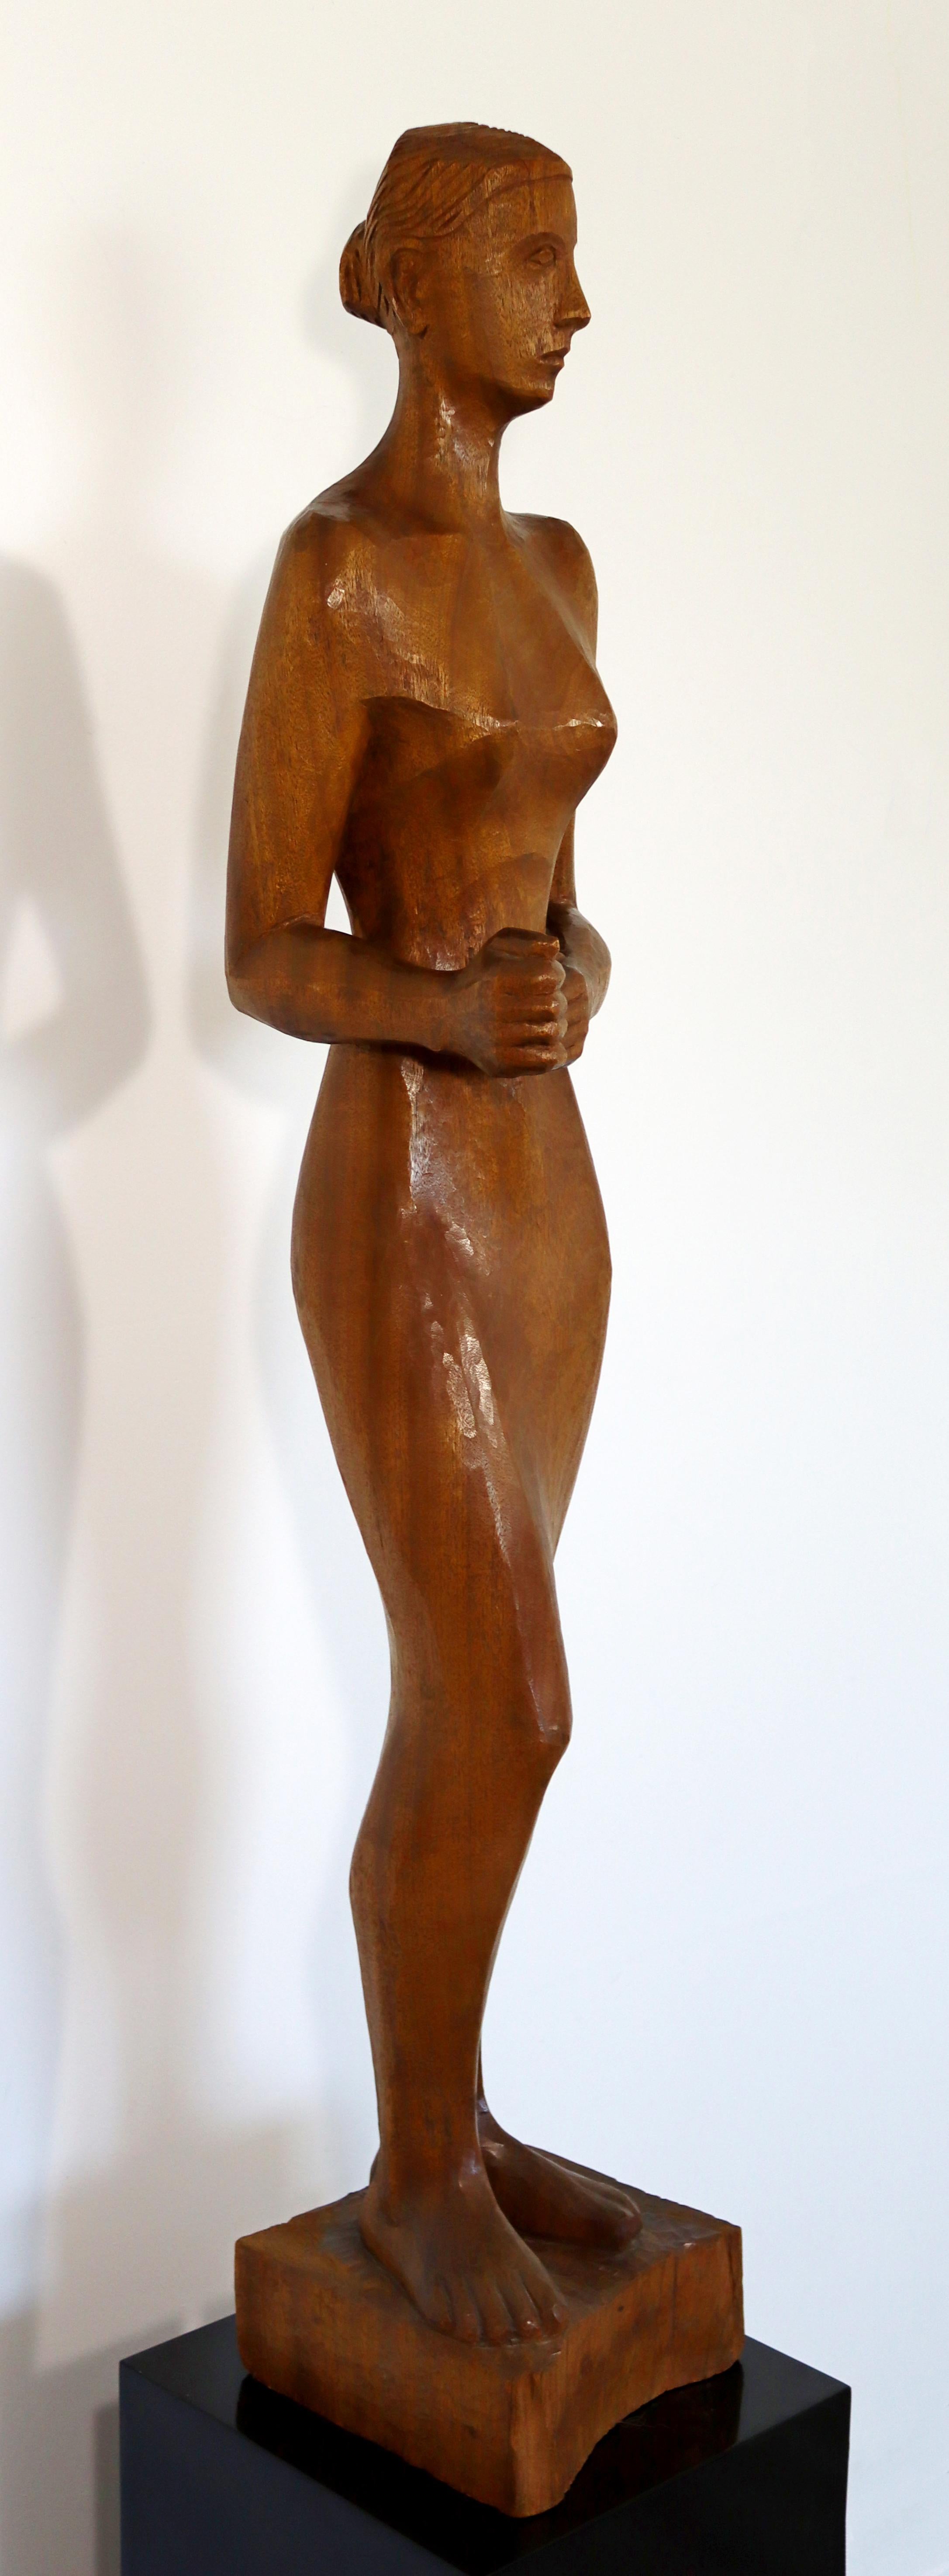 For your consideration is a gorgeous, wood carved sculpture or staute of a thin woman, signed and dated by Walter Midener, 1960. In excellent vintage condition. The dimensions of the sculpture are 9